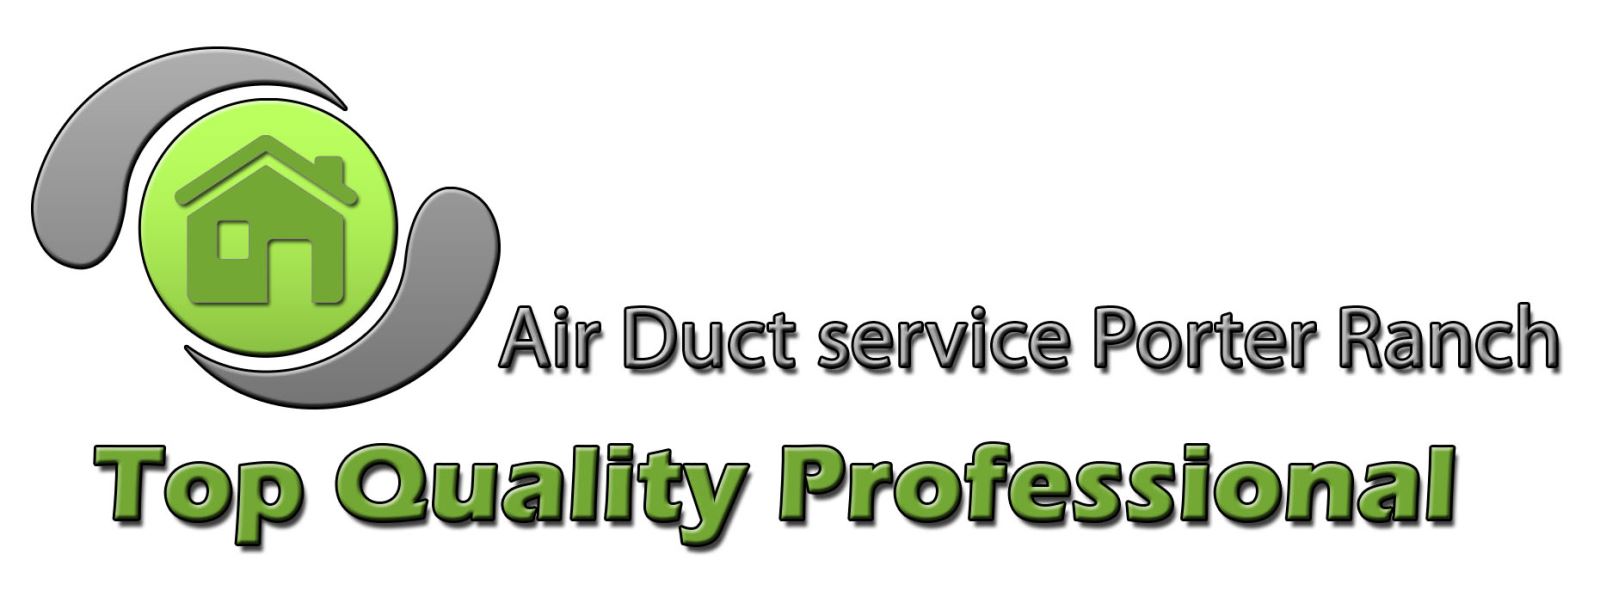 Air Duct Cleaning Porter Ranch,CA